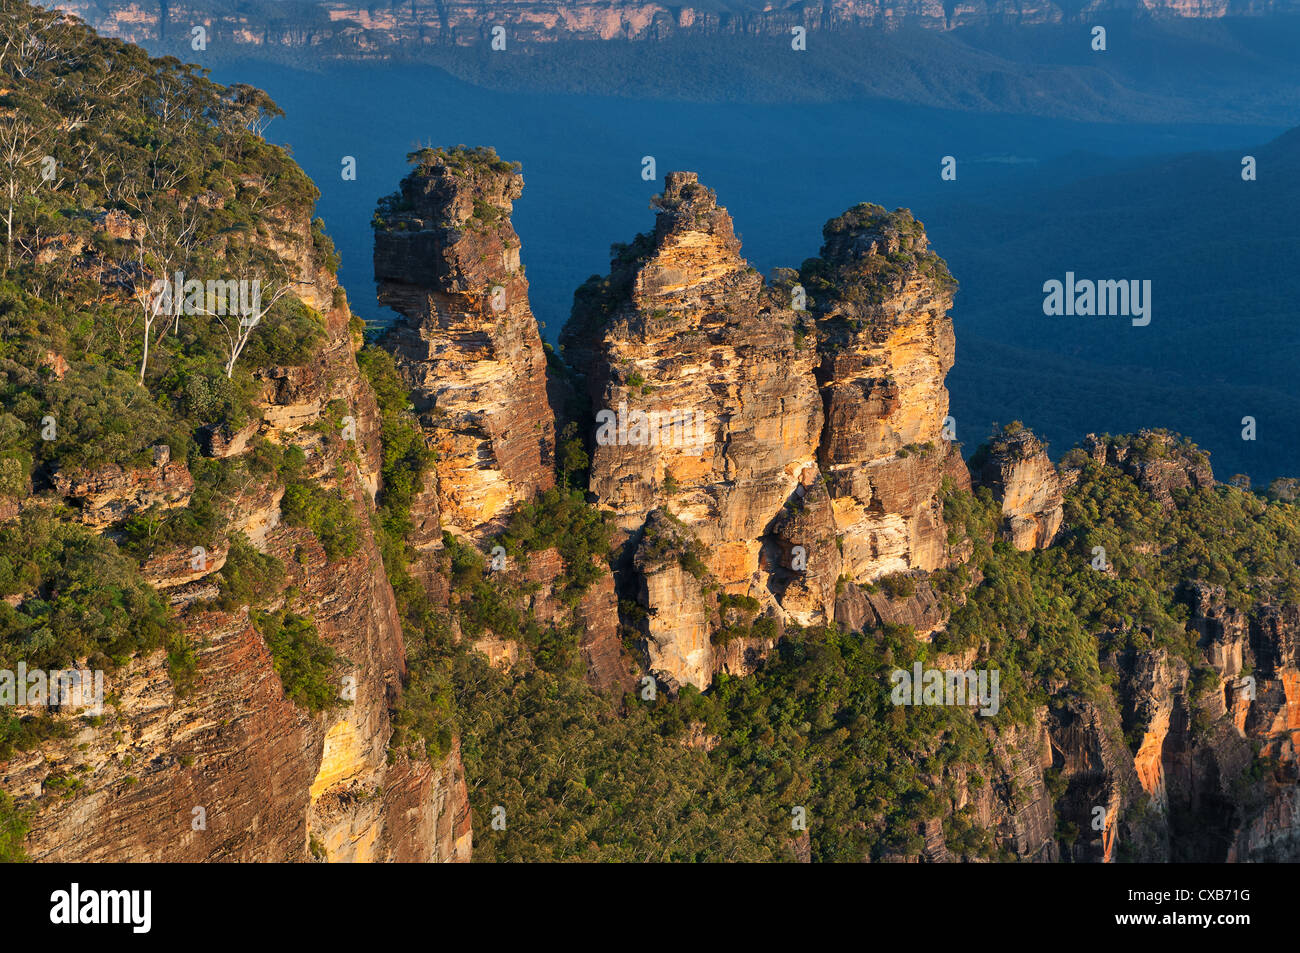 The rock formation of the Three Sisters towering over Jamison Valley. Stock Photo